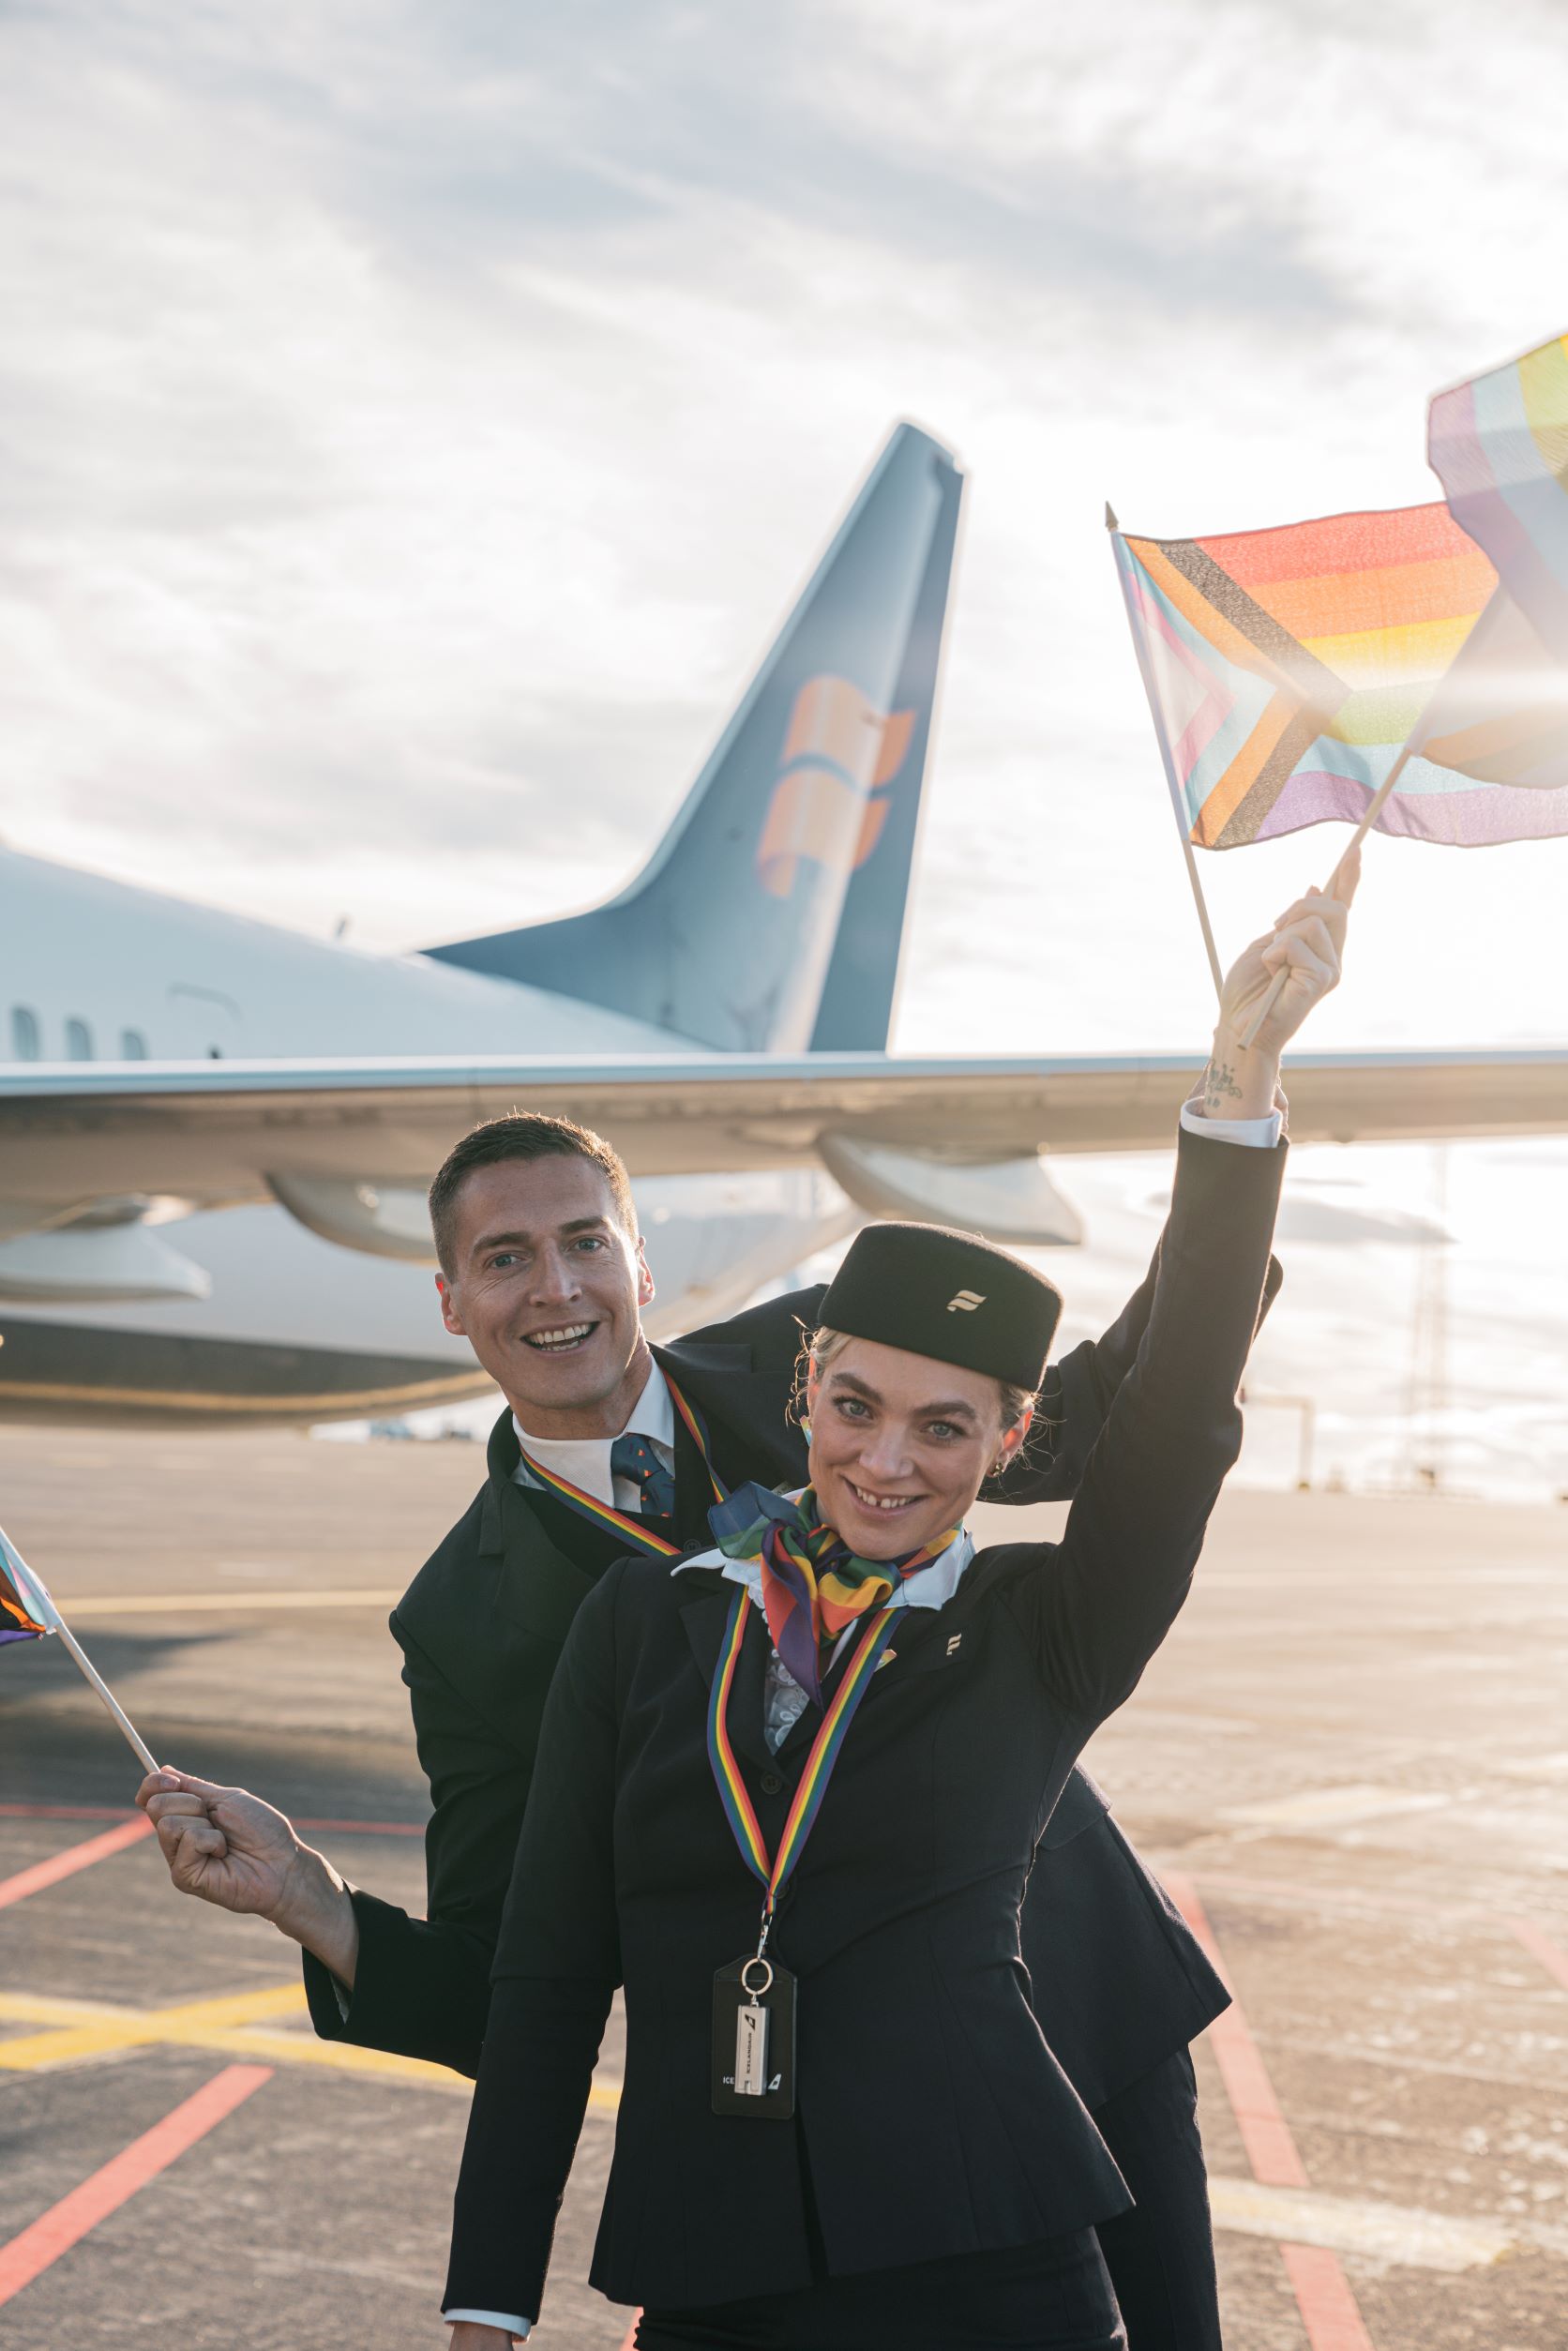 Icelandair Pride flight 2022: 2 cabin crew stand in front of aircraft waving rainbow flags